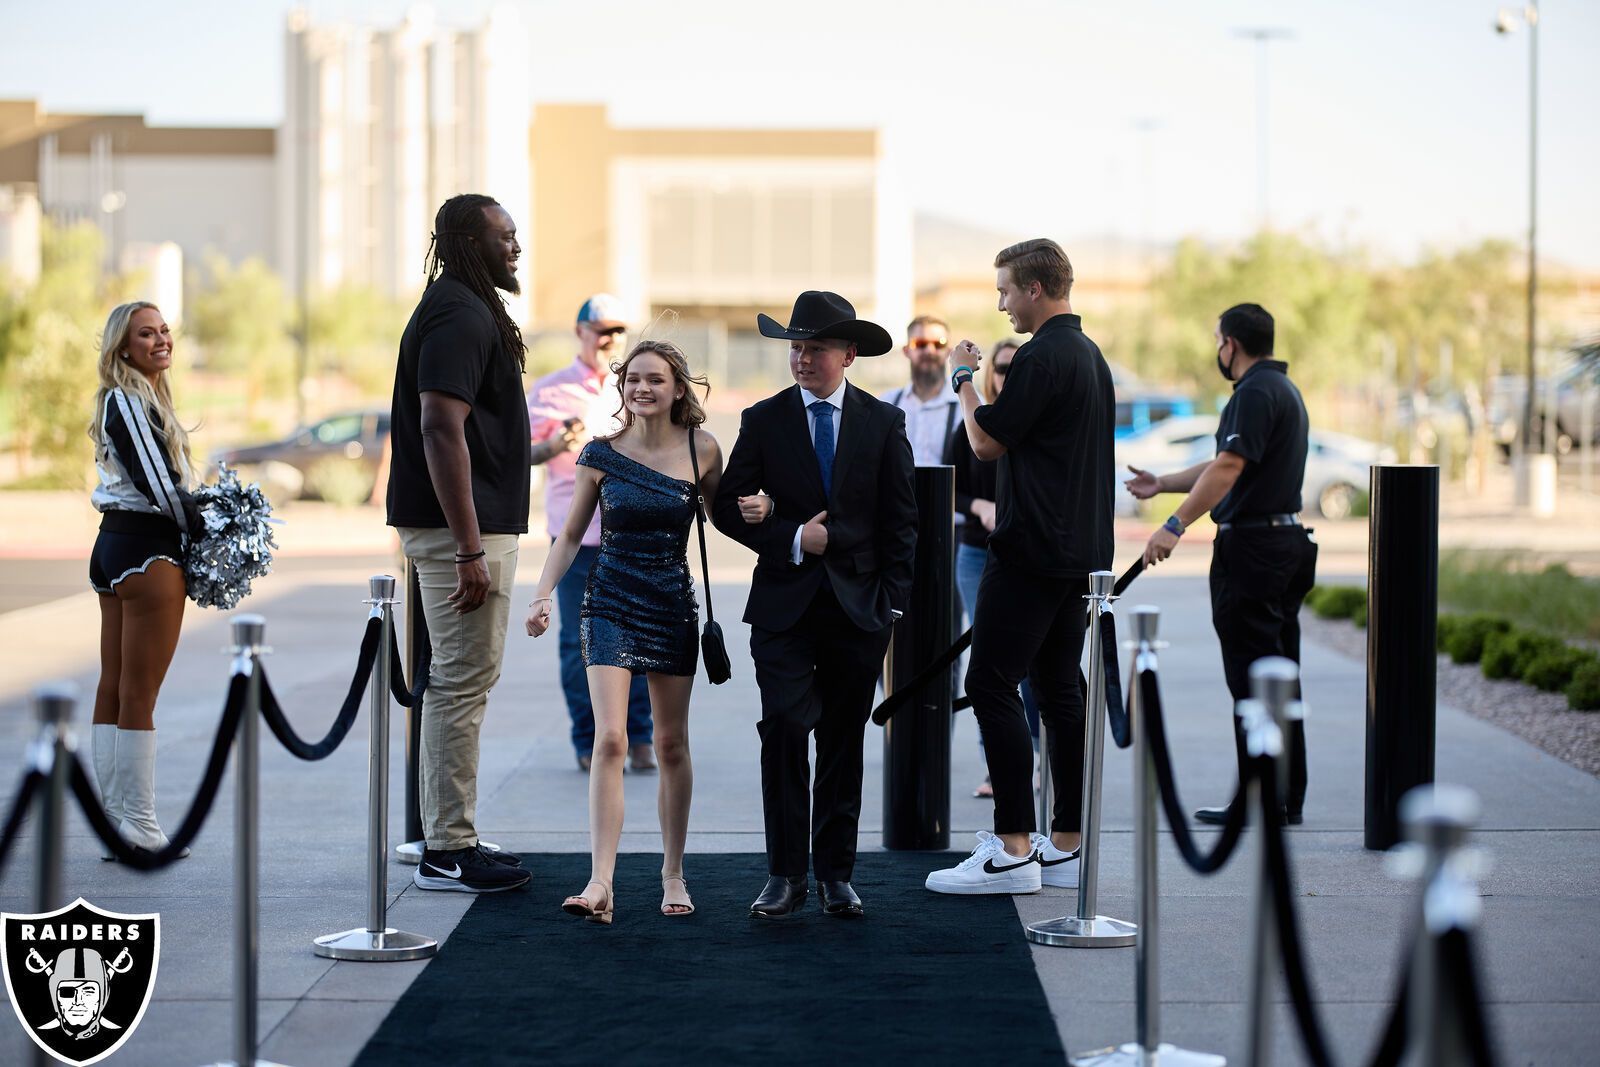 Las Vegas Raiders host 'Pediatric Prom' night for patients at team facility